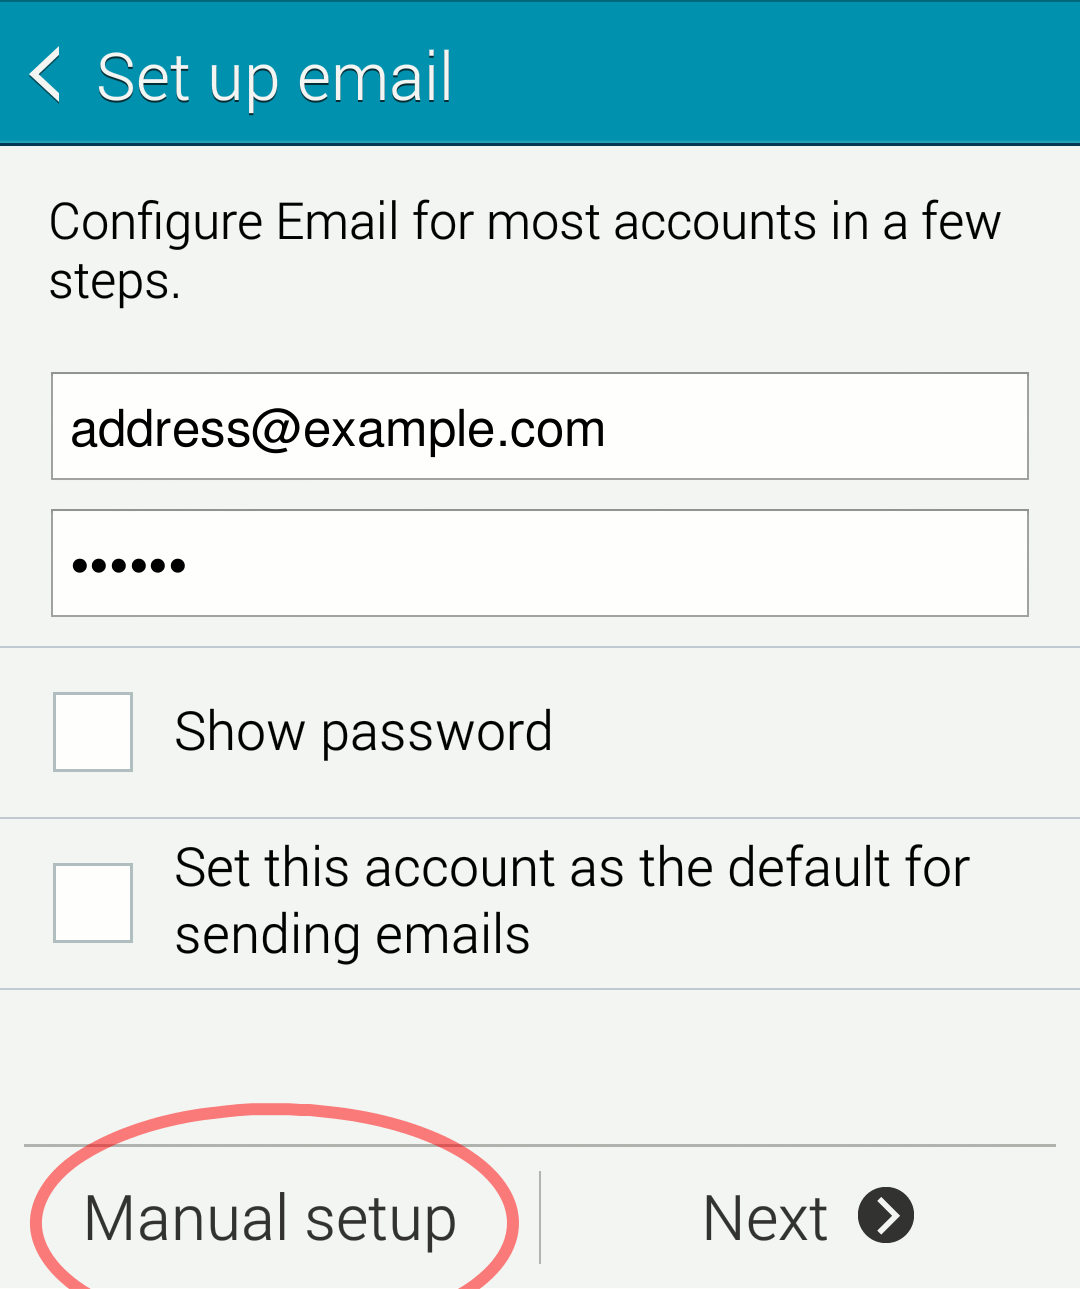 Android “Set up email” screen